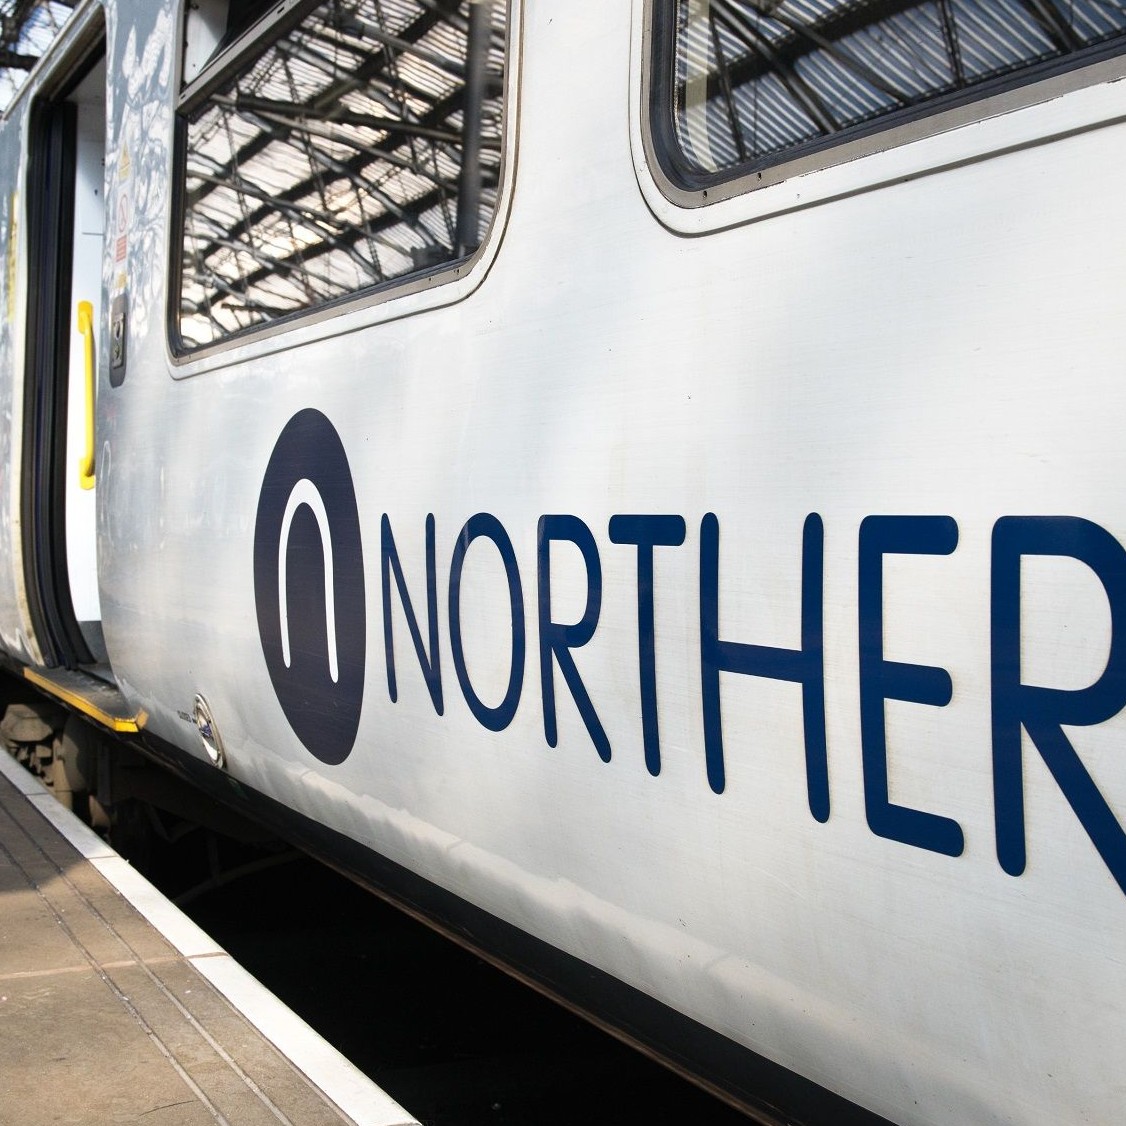 Image shows a Northern train on a platform cropped